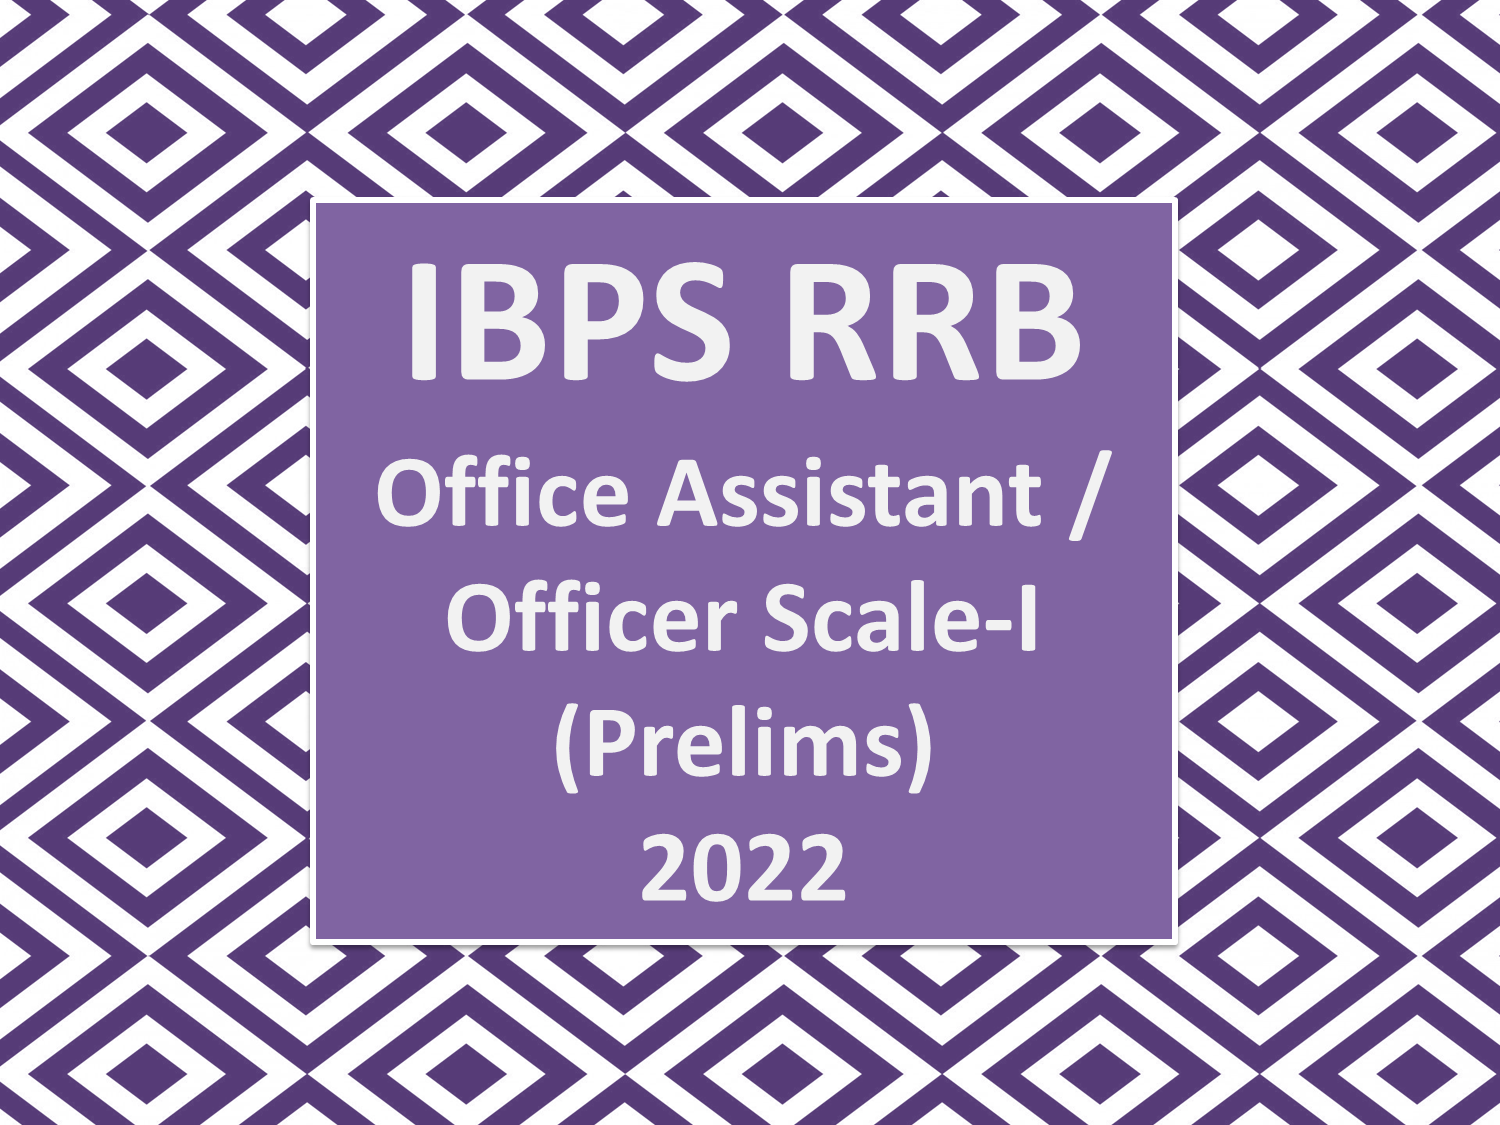 IBPS RRB Office Assistant / Officer Scale-I (Prelims) 2022